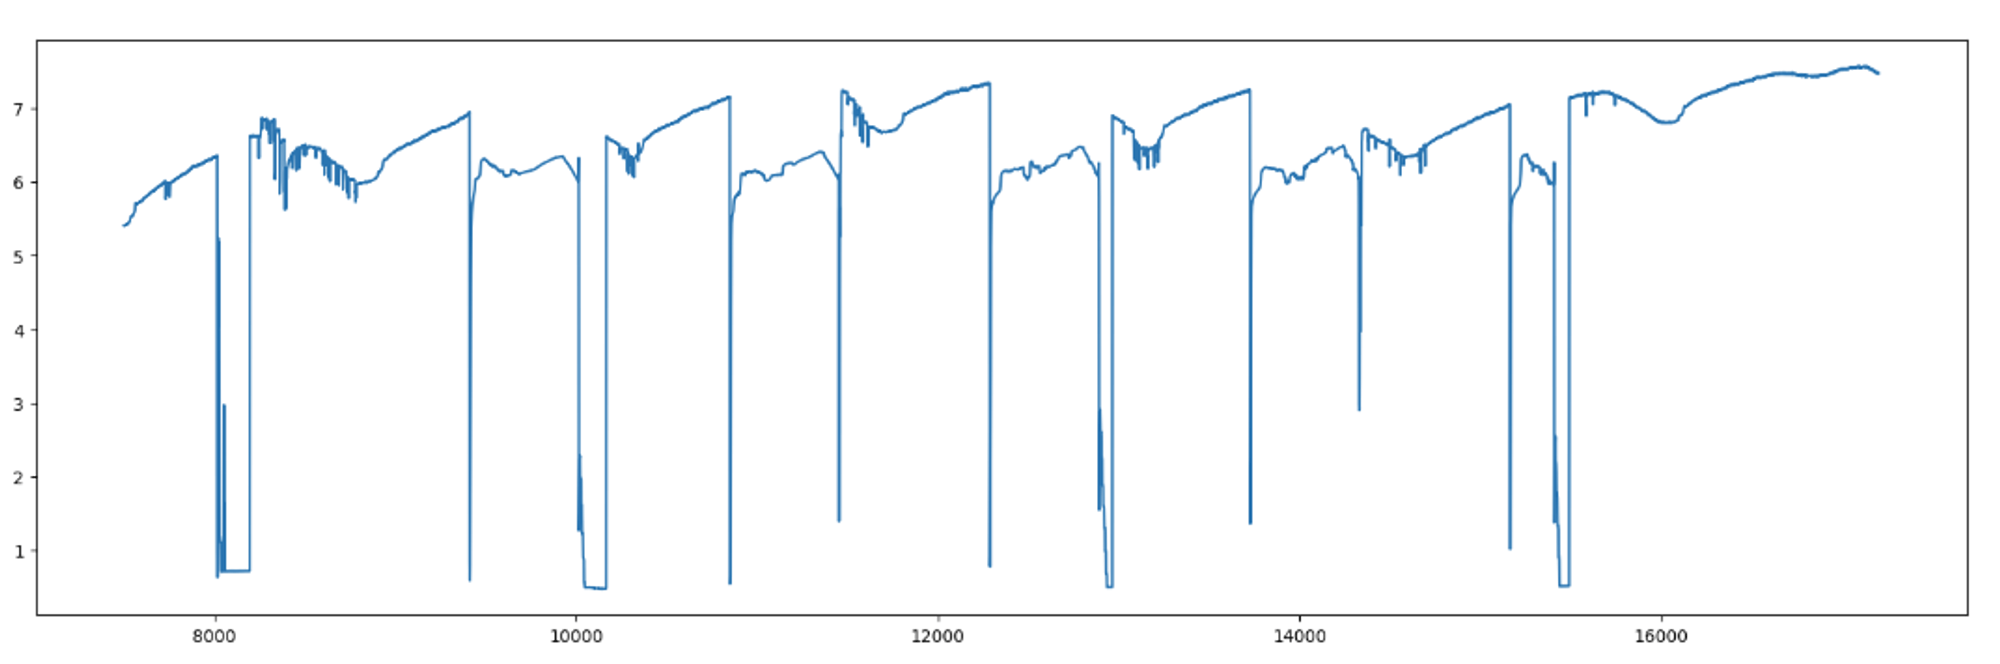 Low Spike Pattern Detection Signal